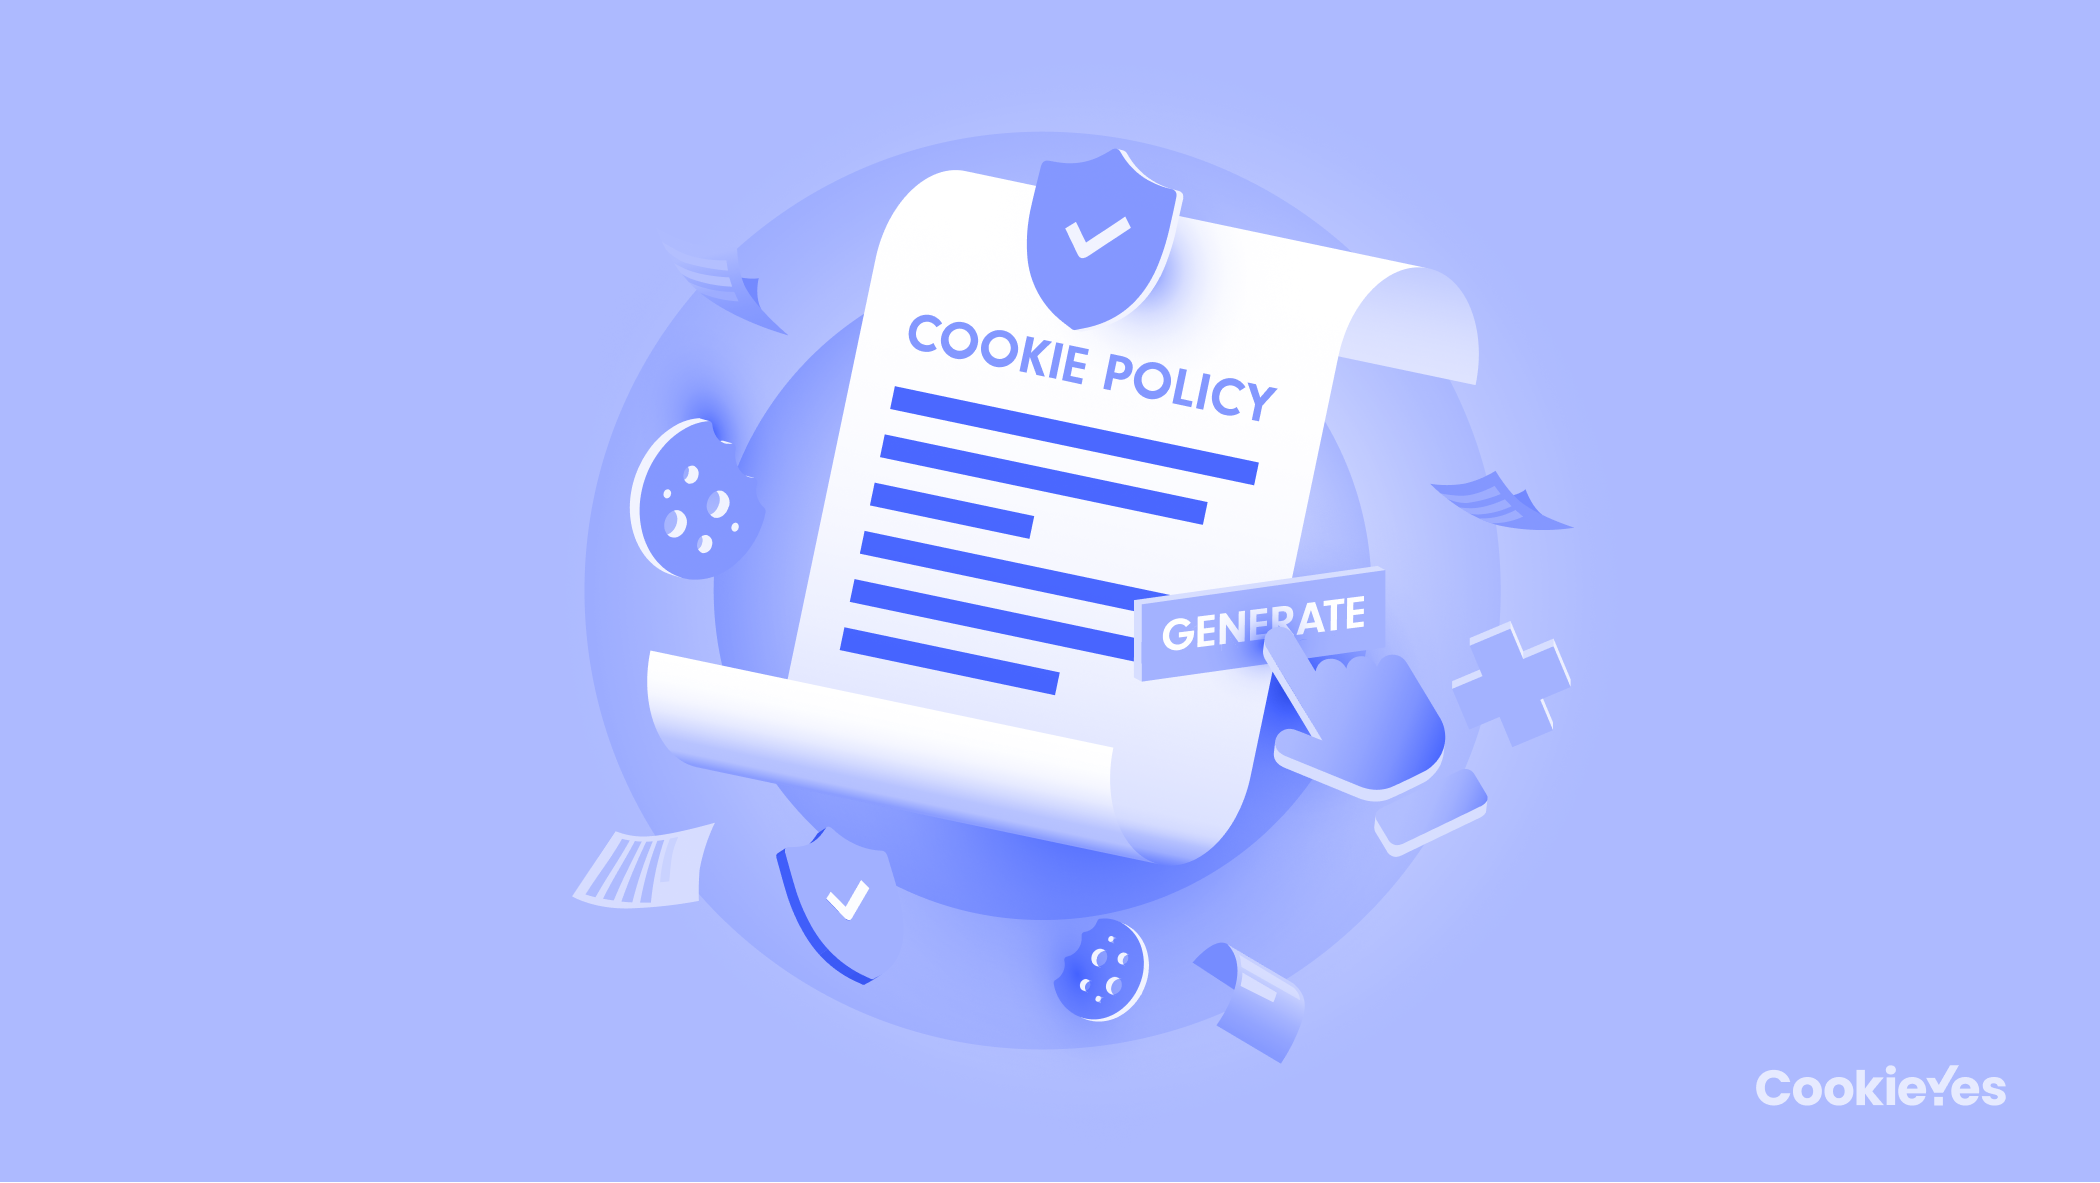 Featured image of Cookie Policy Template for GDPR & CCPA Compliance